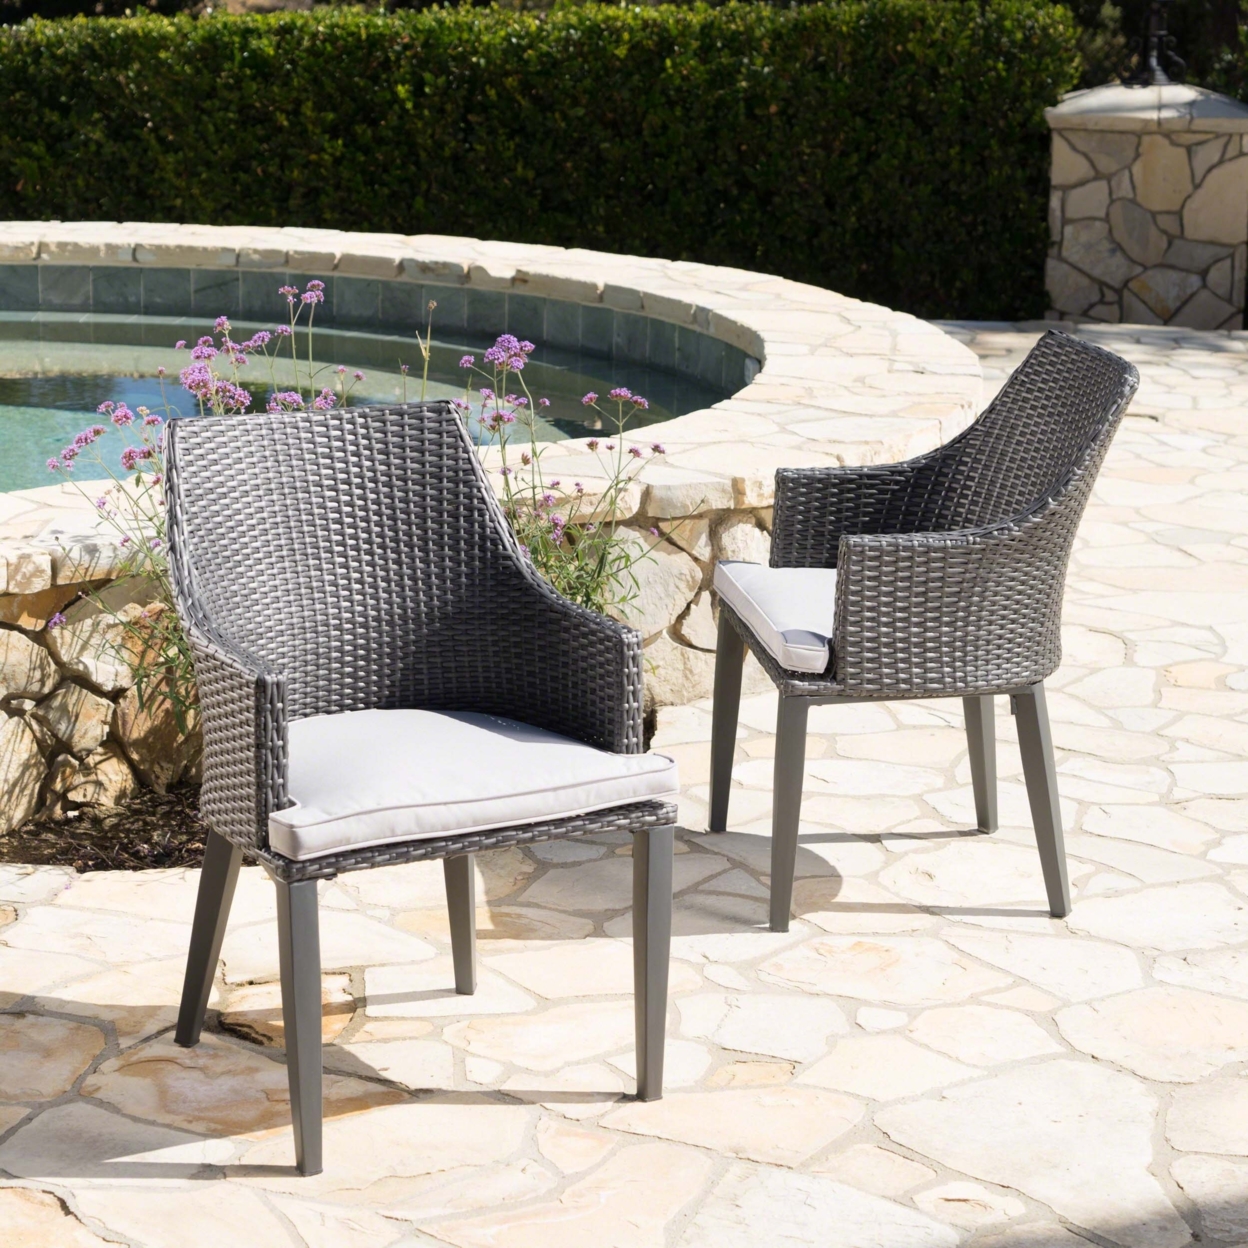 Hillcrest Outdoor Wicker Dining Chairs With Water Resistant Cushions (Set Of 2) - Gray/Light Gray